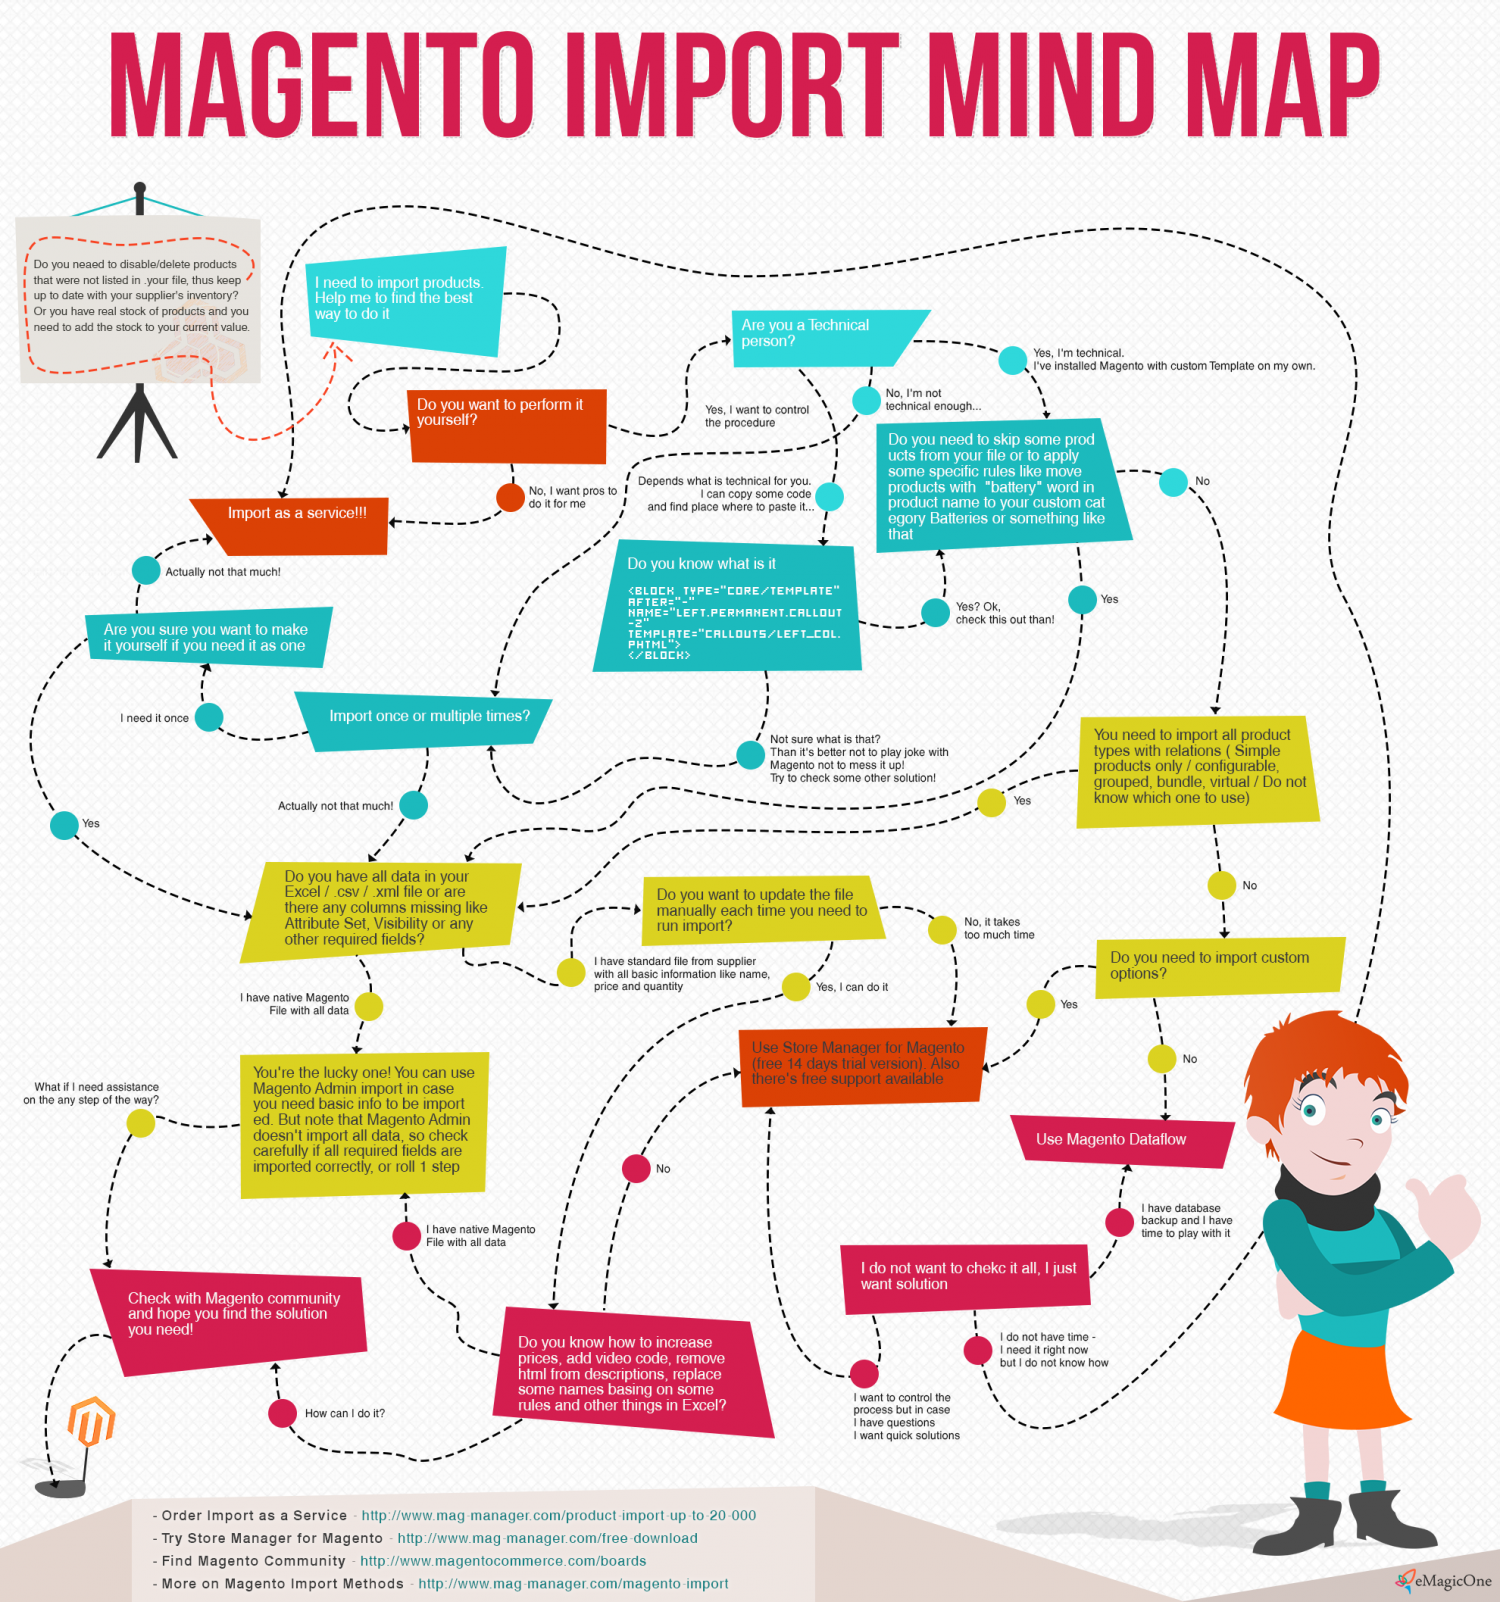 Magento Import Mind Map Infographic